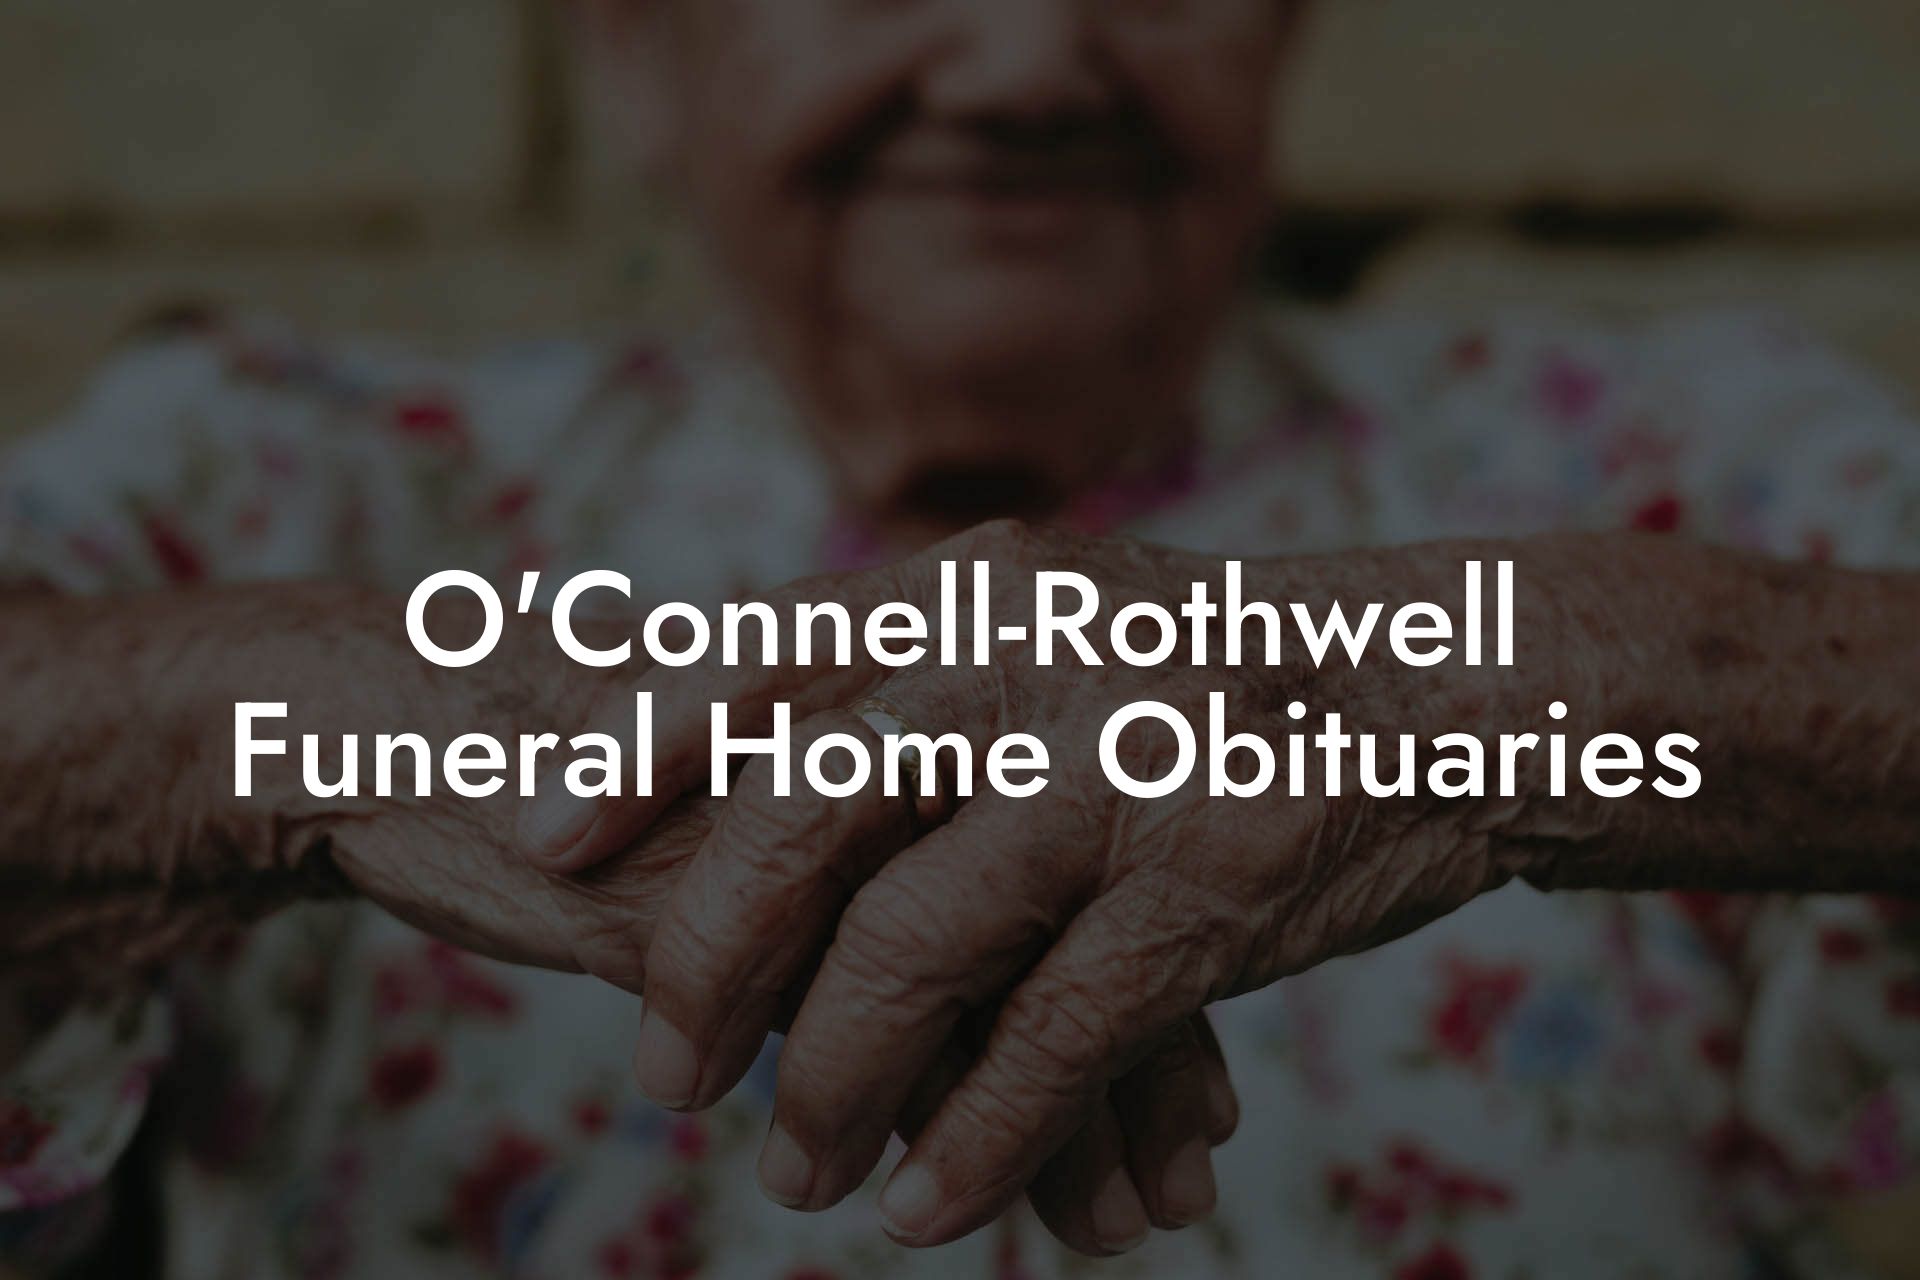 O'Connell-Rothwell Funeral Home Obituaries